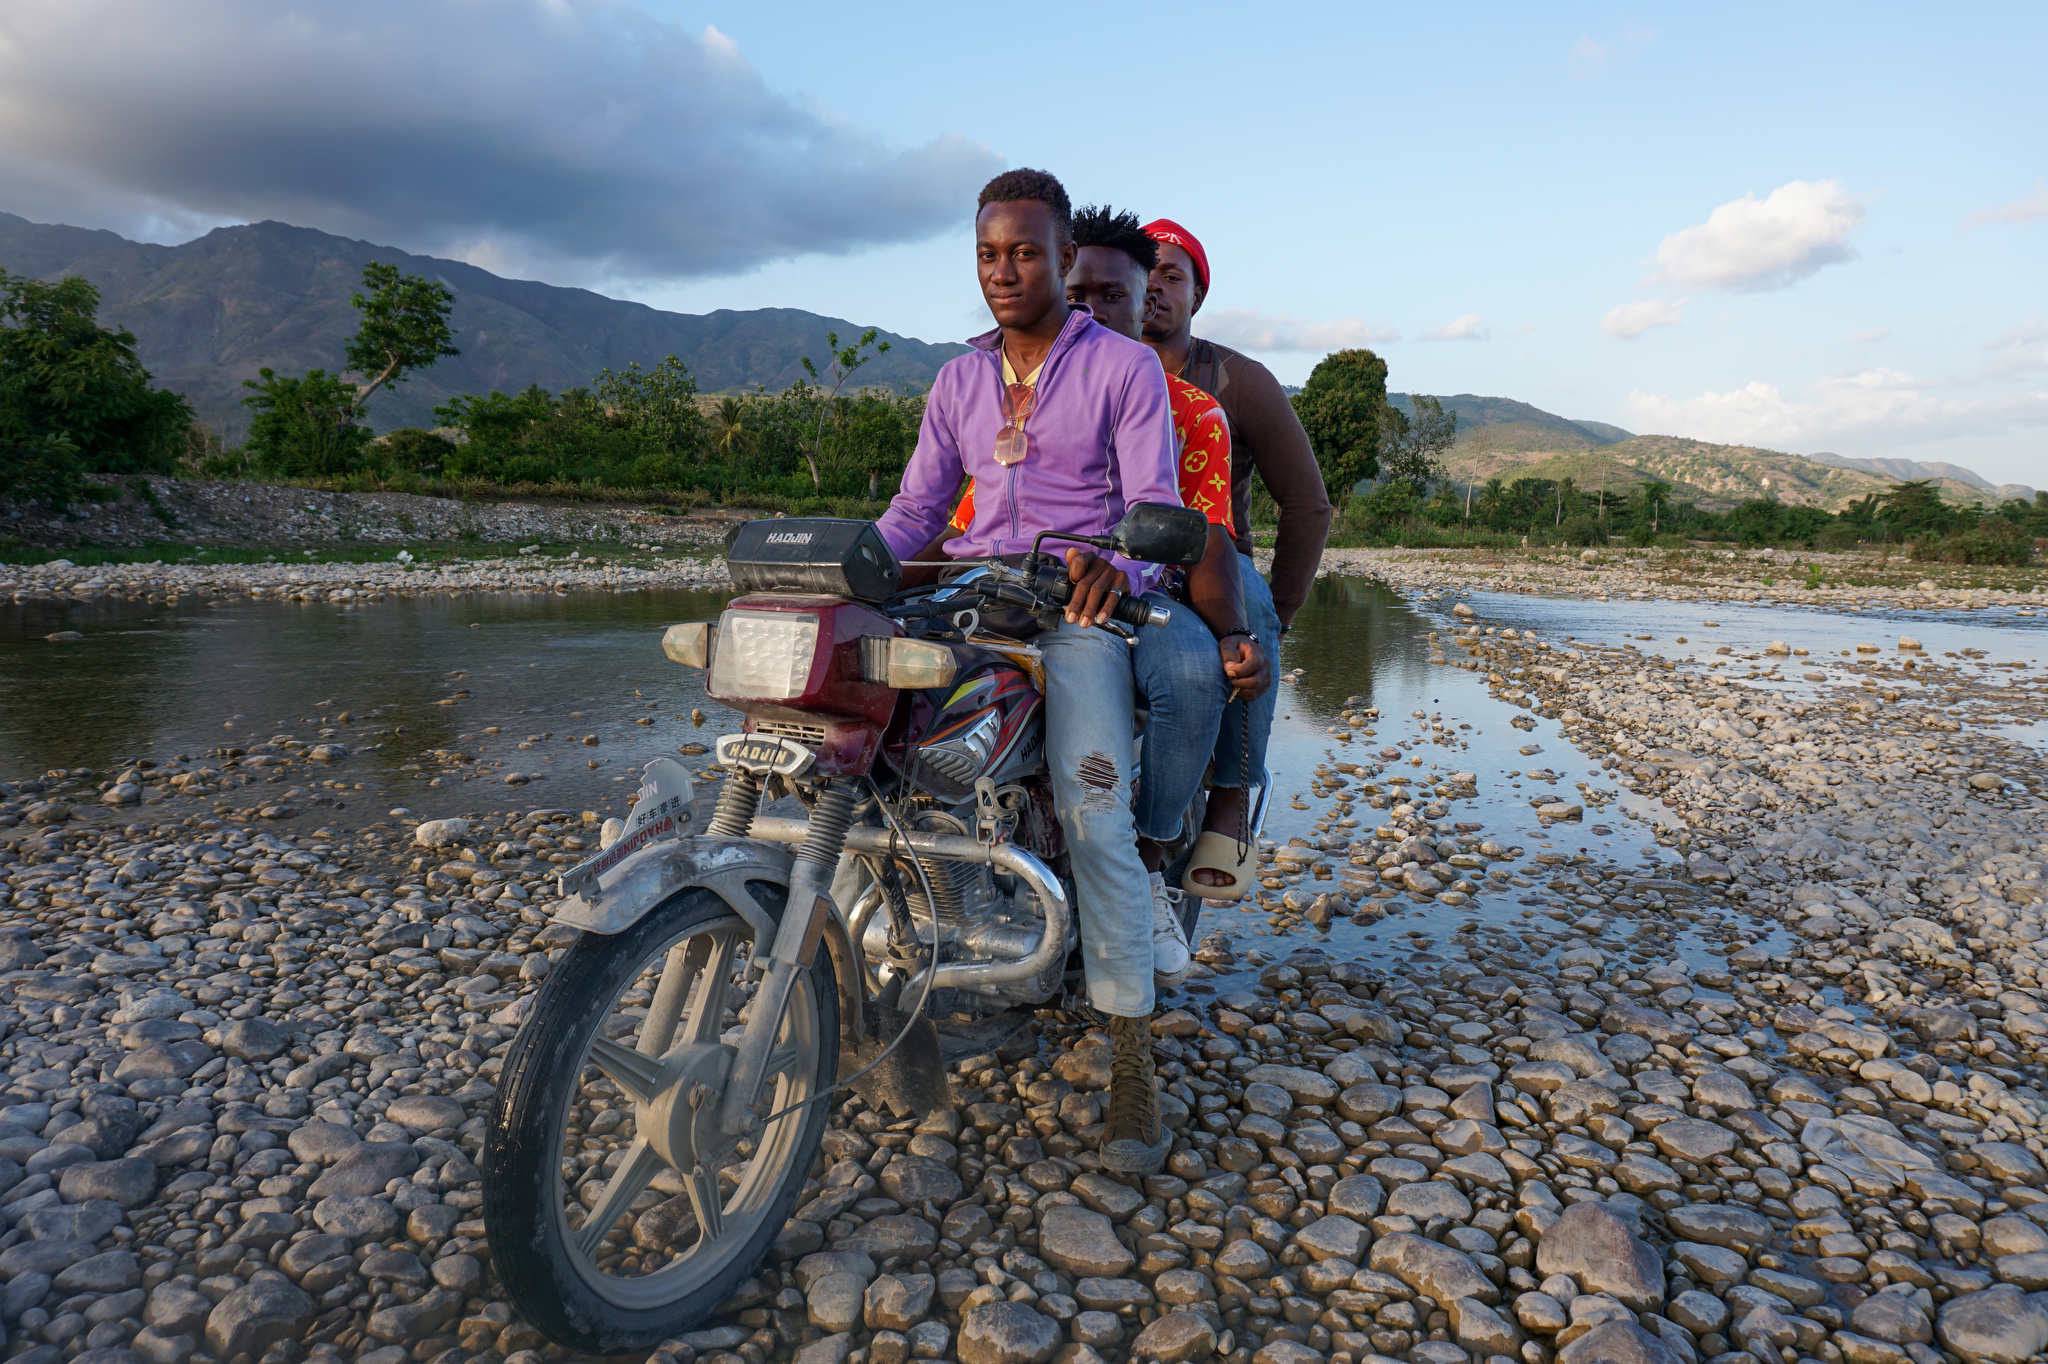 Motorbike Taxis Transformed This Haitian Community. Now They Are Under Threat.